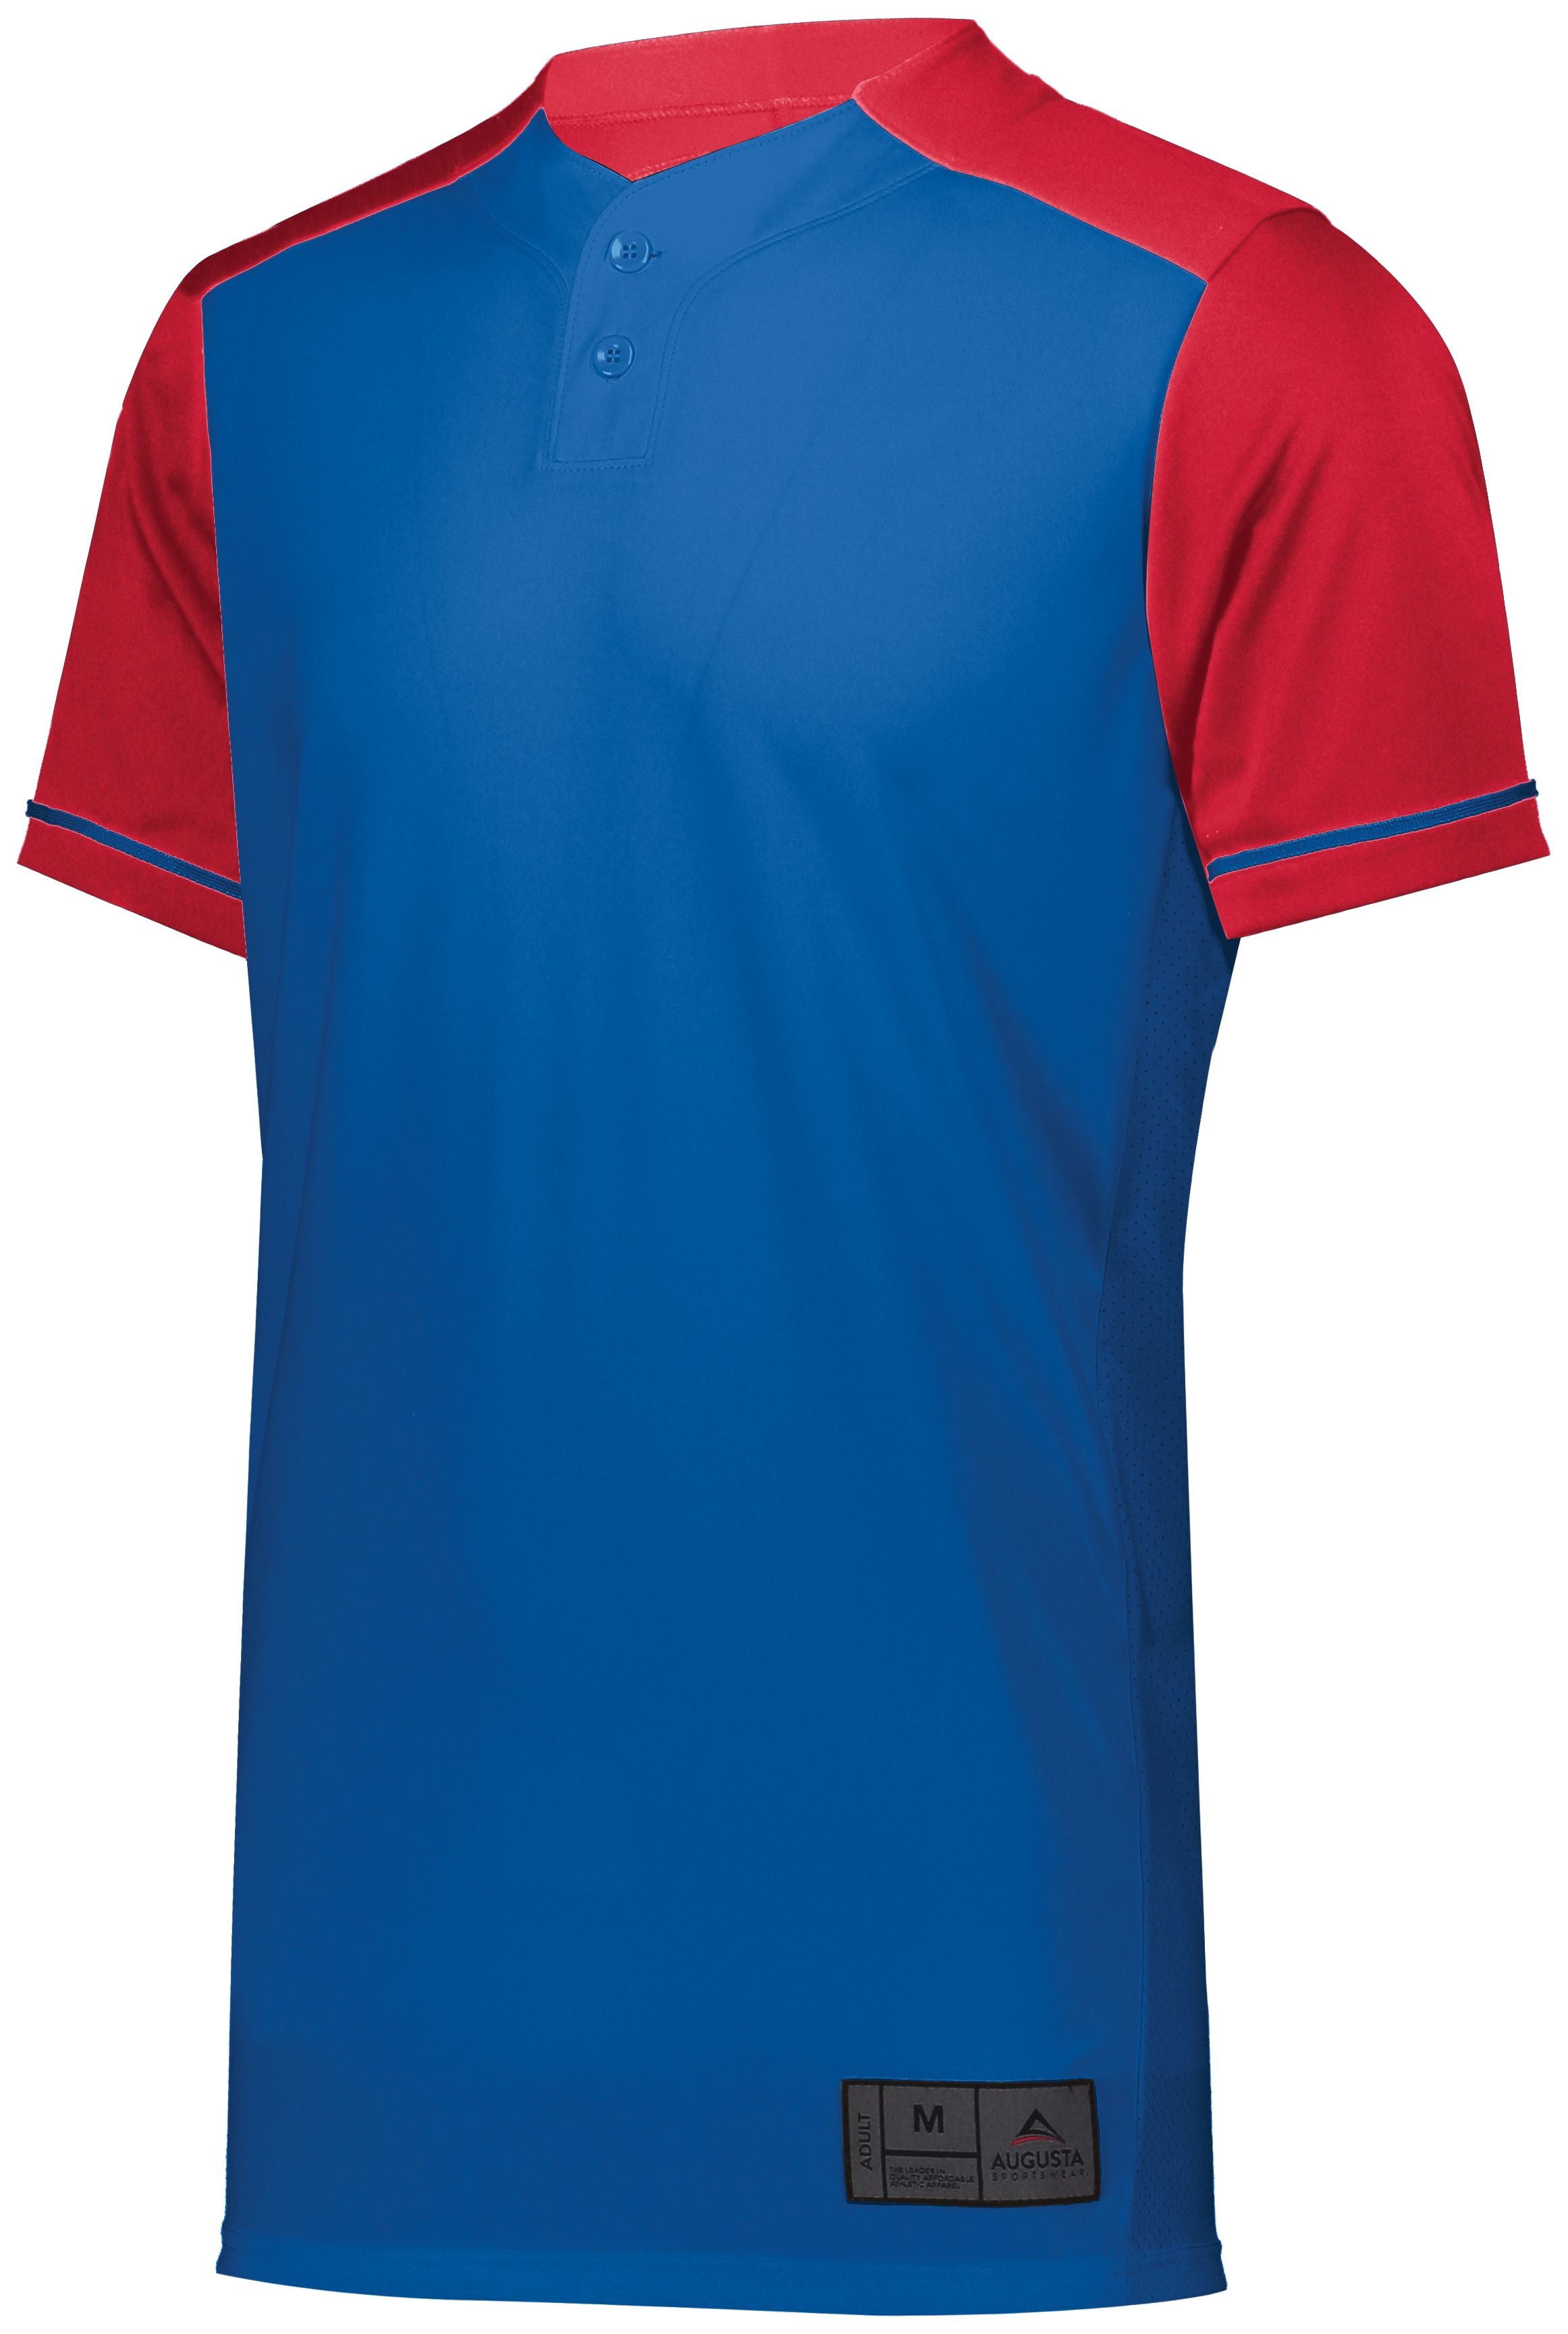 Augusta Sportswear Closer Jersey in Royal/Scarlet  -Part of the Adult, Adult-Jersey, Augusta-Products, Baseball, Shirts, All-Sports, All-Sports-1 product lines at KanaleyCreations.com